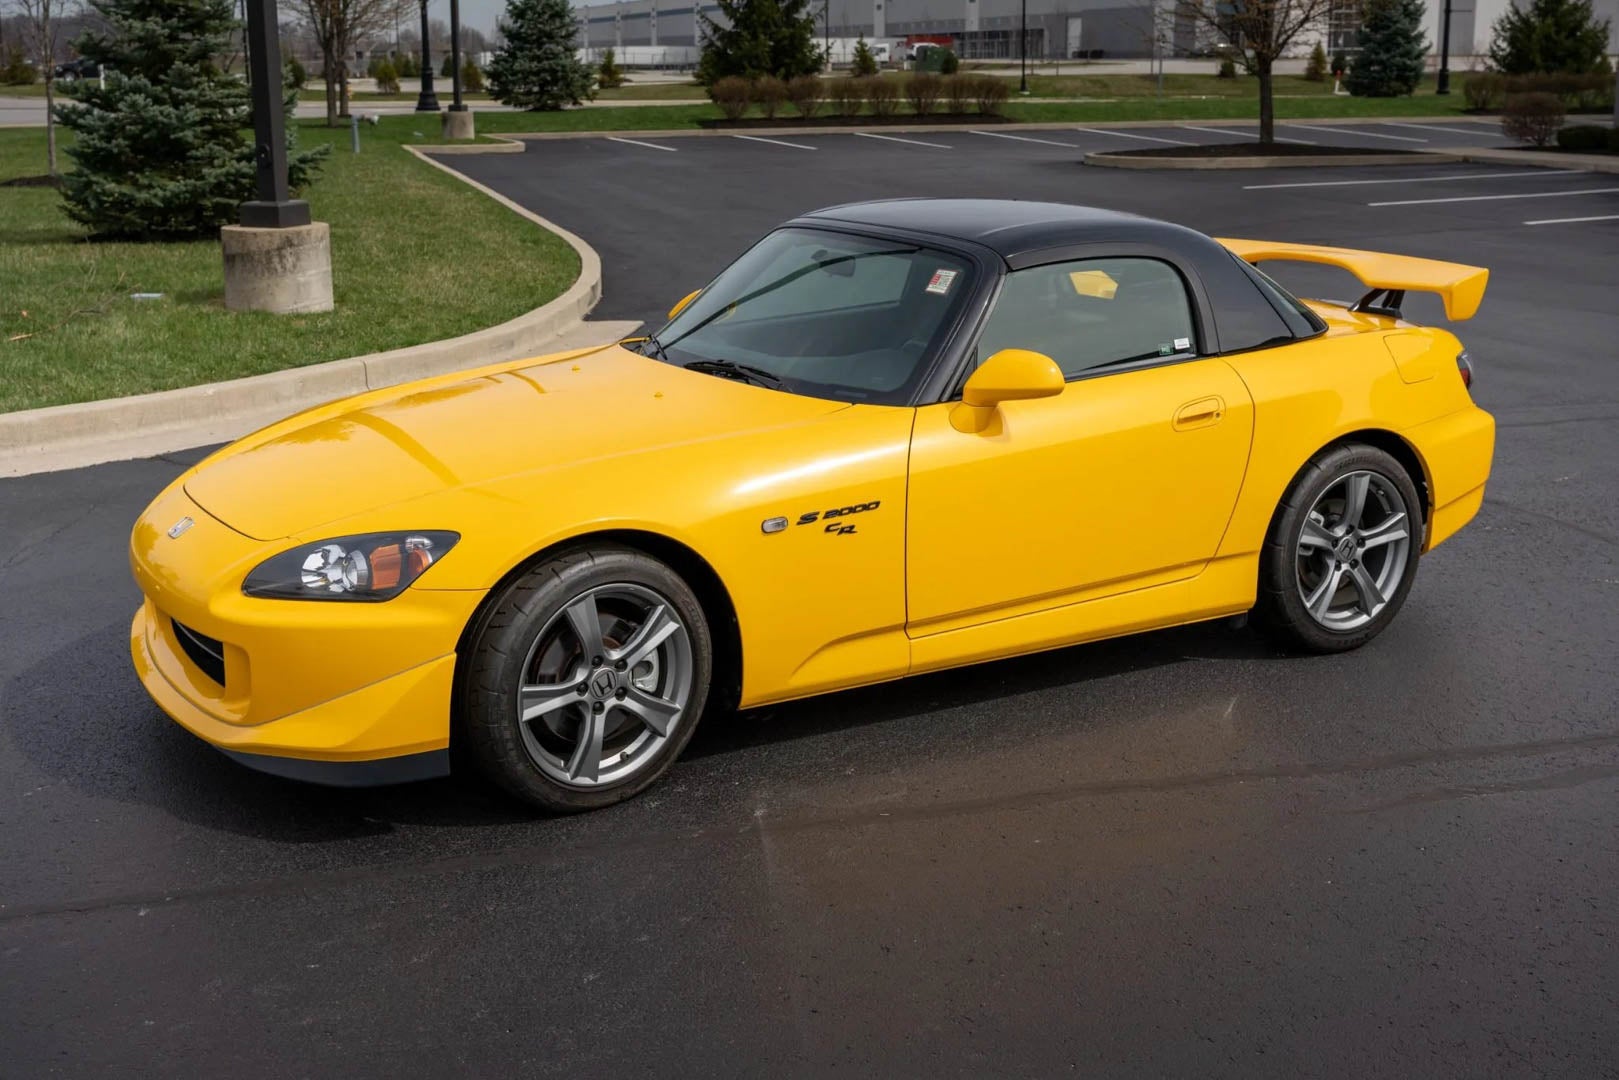 Ultra Rare 123 Mile Honda S2000 CR Sells for an Eye Watering 200000